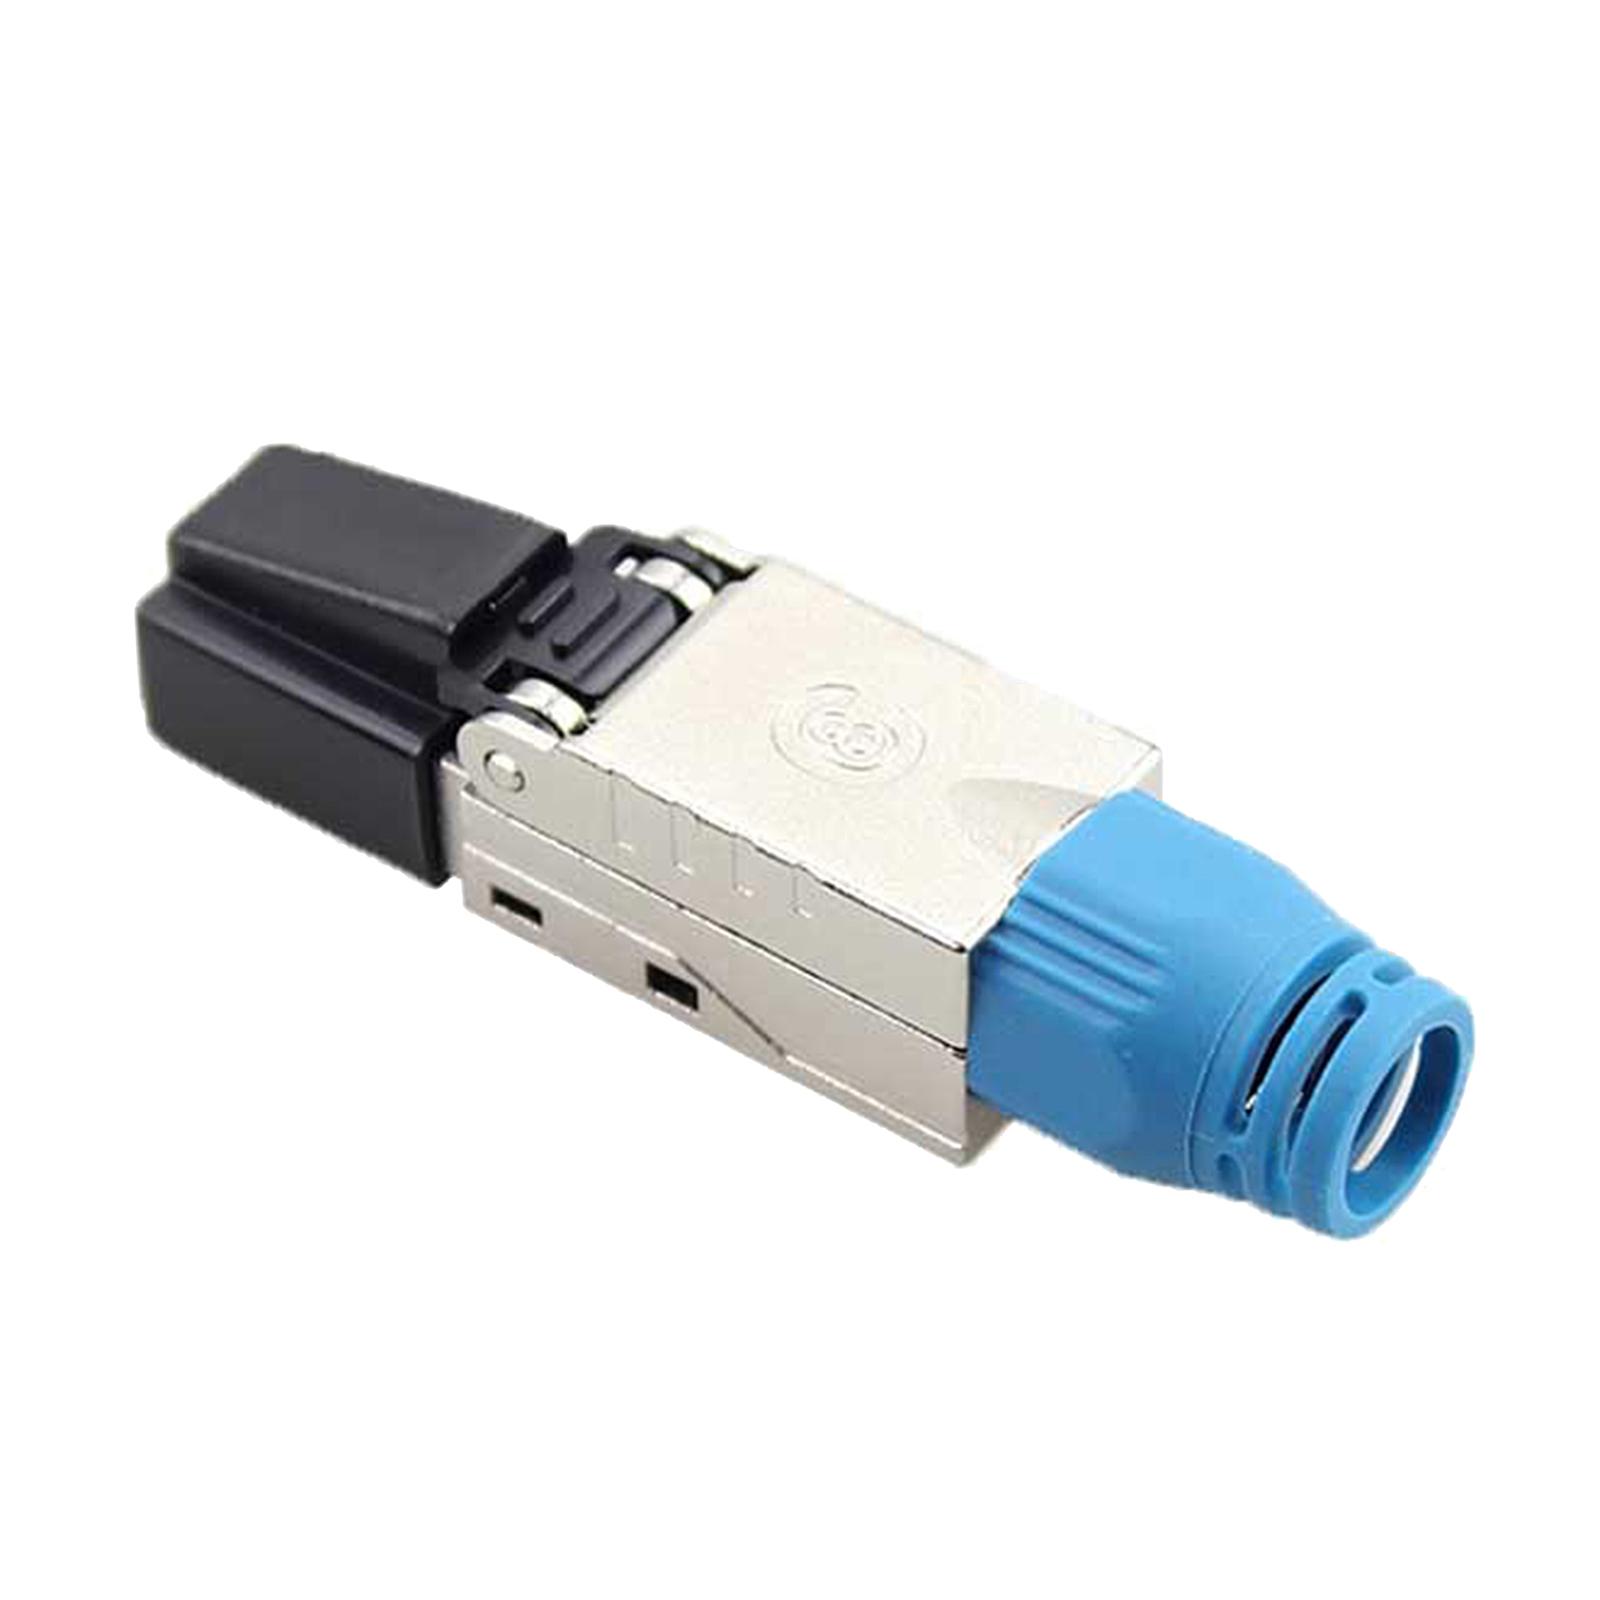 Tool-Free Reusable Plugs Connectors for UTP Cable 10G Easy Internet Plug